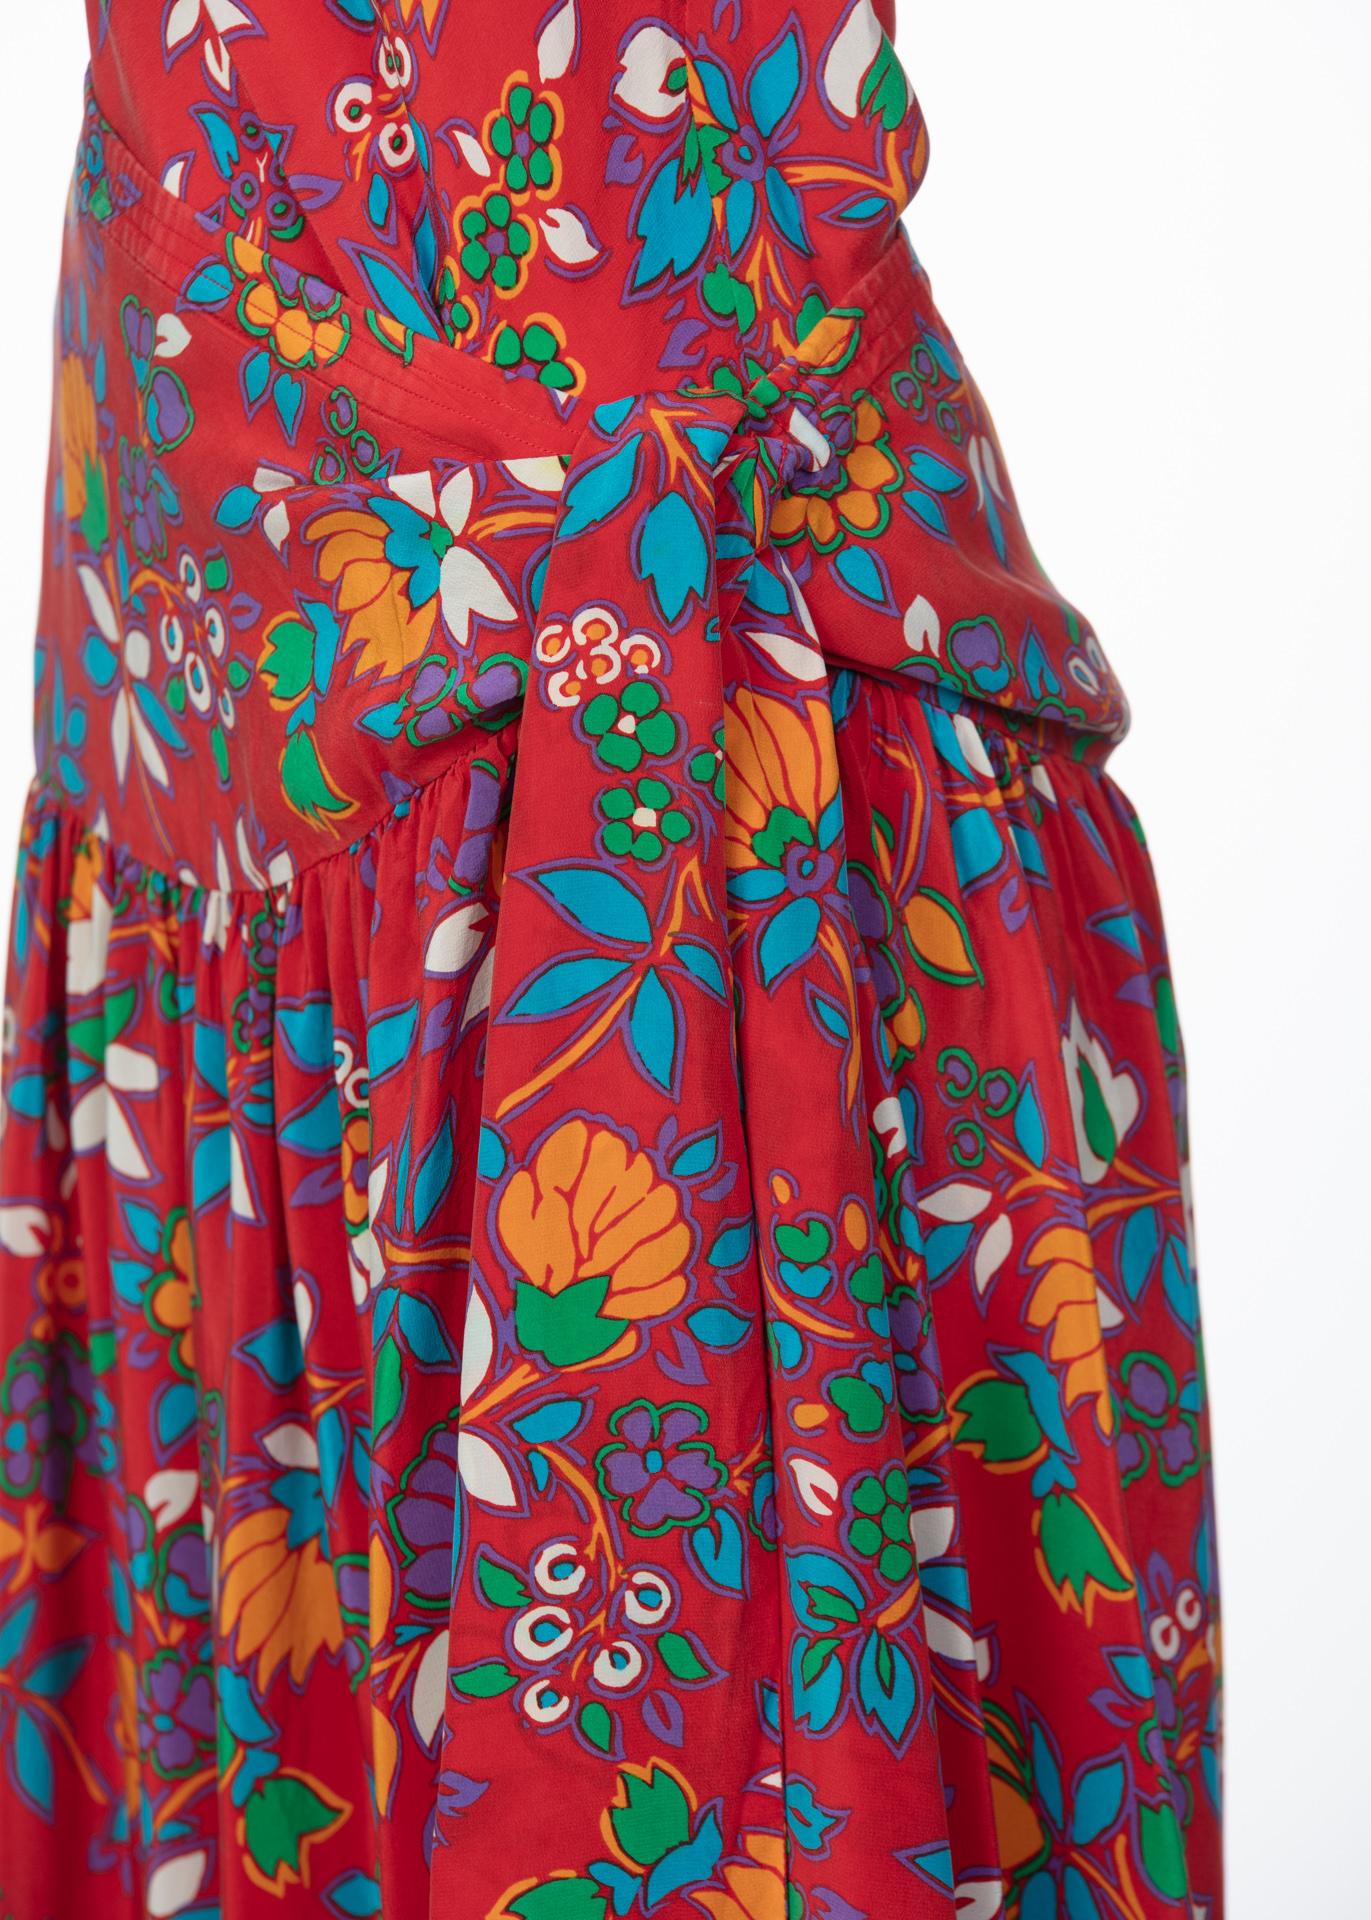 Yves Saint Laurent YSL Multicolor Floral Print Top and Skirt Set, 1980s  For Sale 1